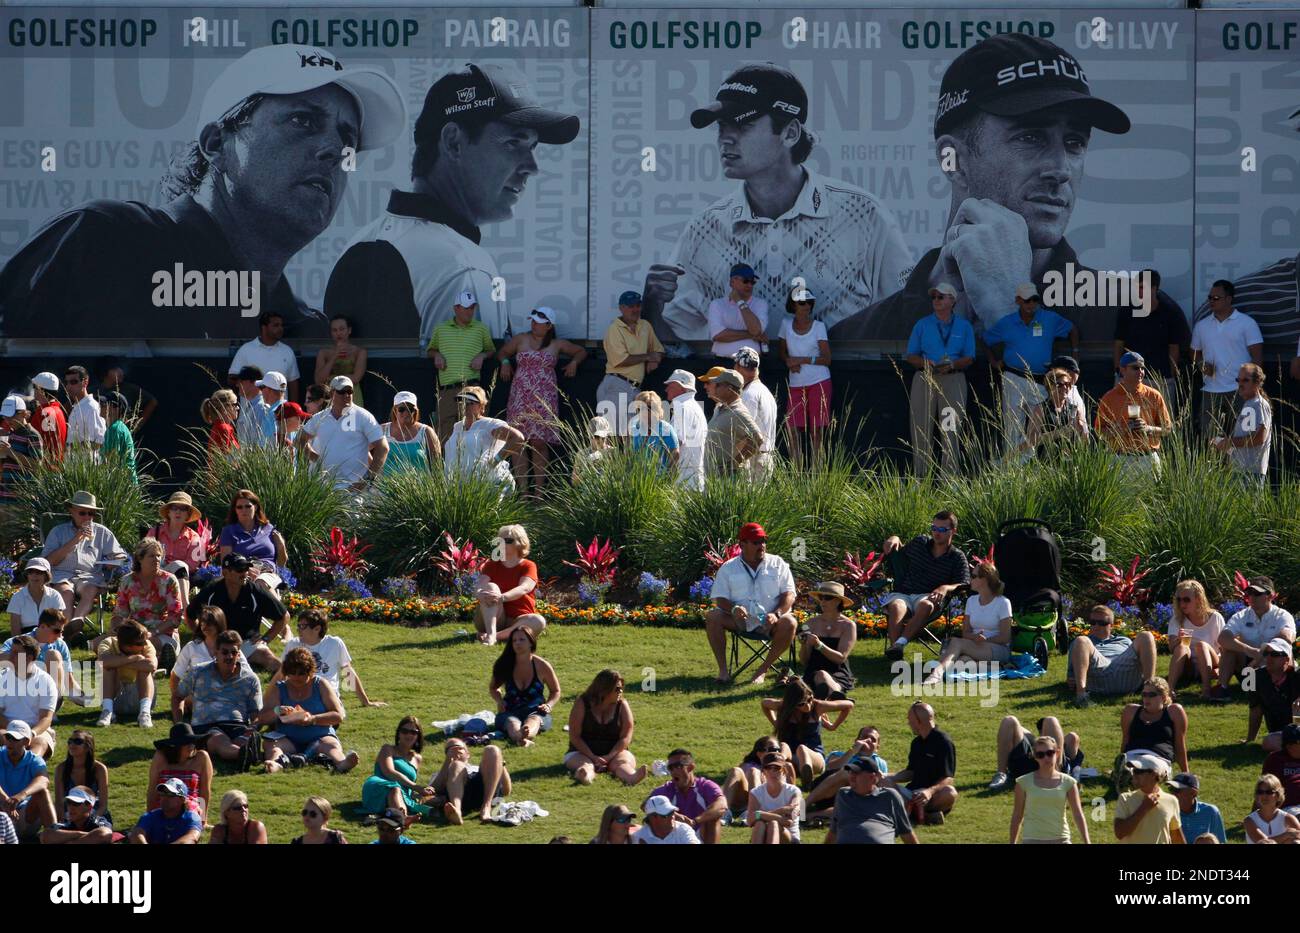 Spectators watch from the 16th hole during the final round of The Players Championship golf tournament Sunday, May 9, 2010, in Ponte Vedra Beach, Fla